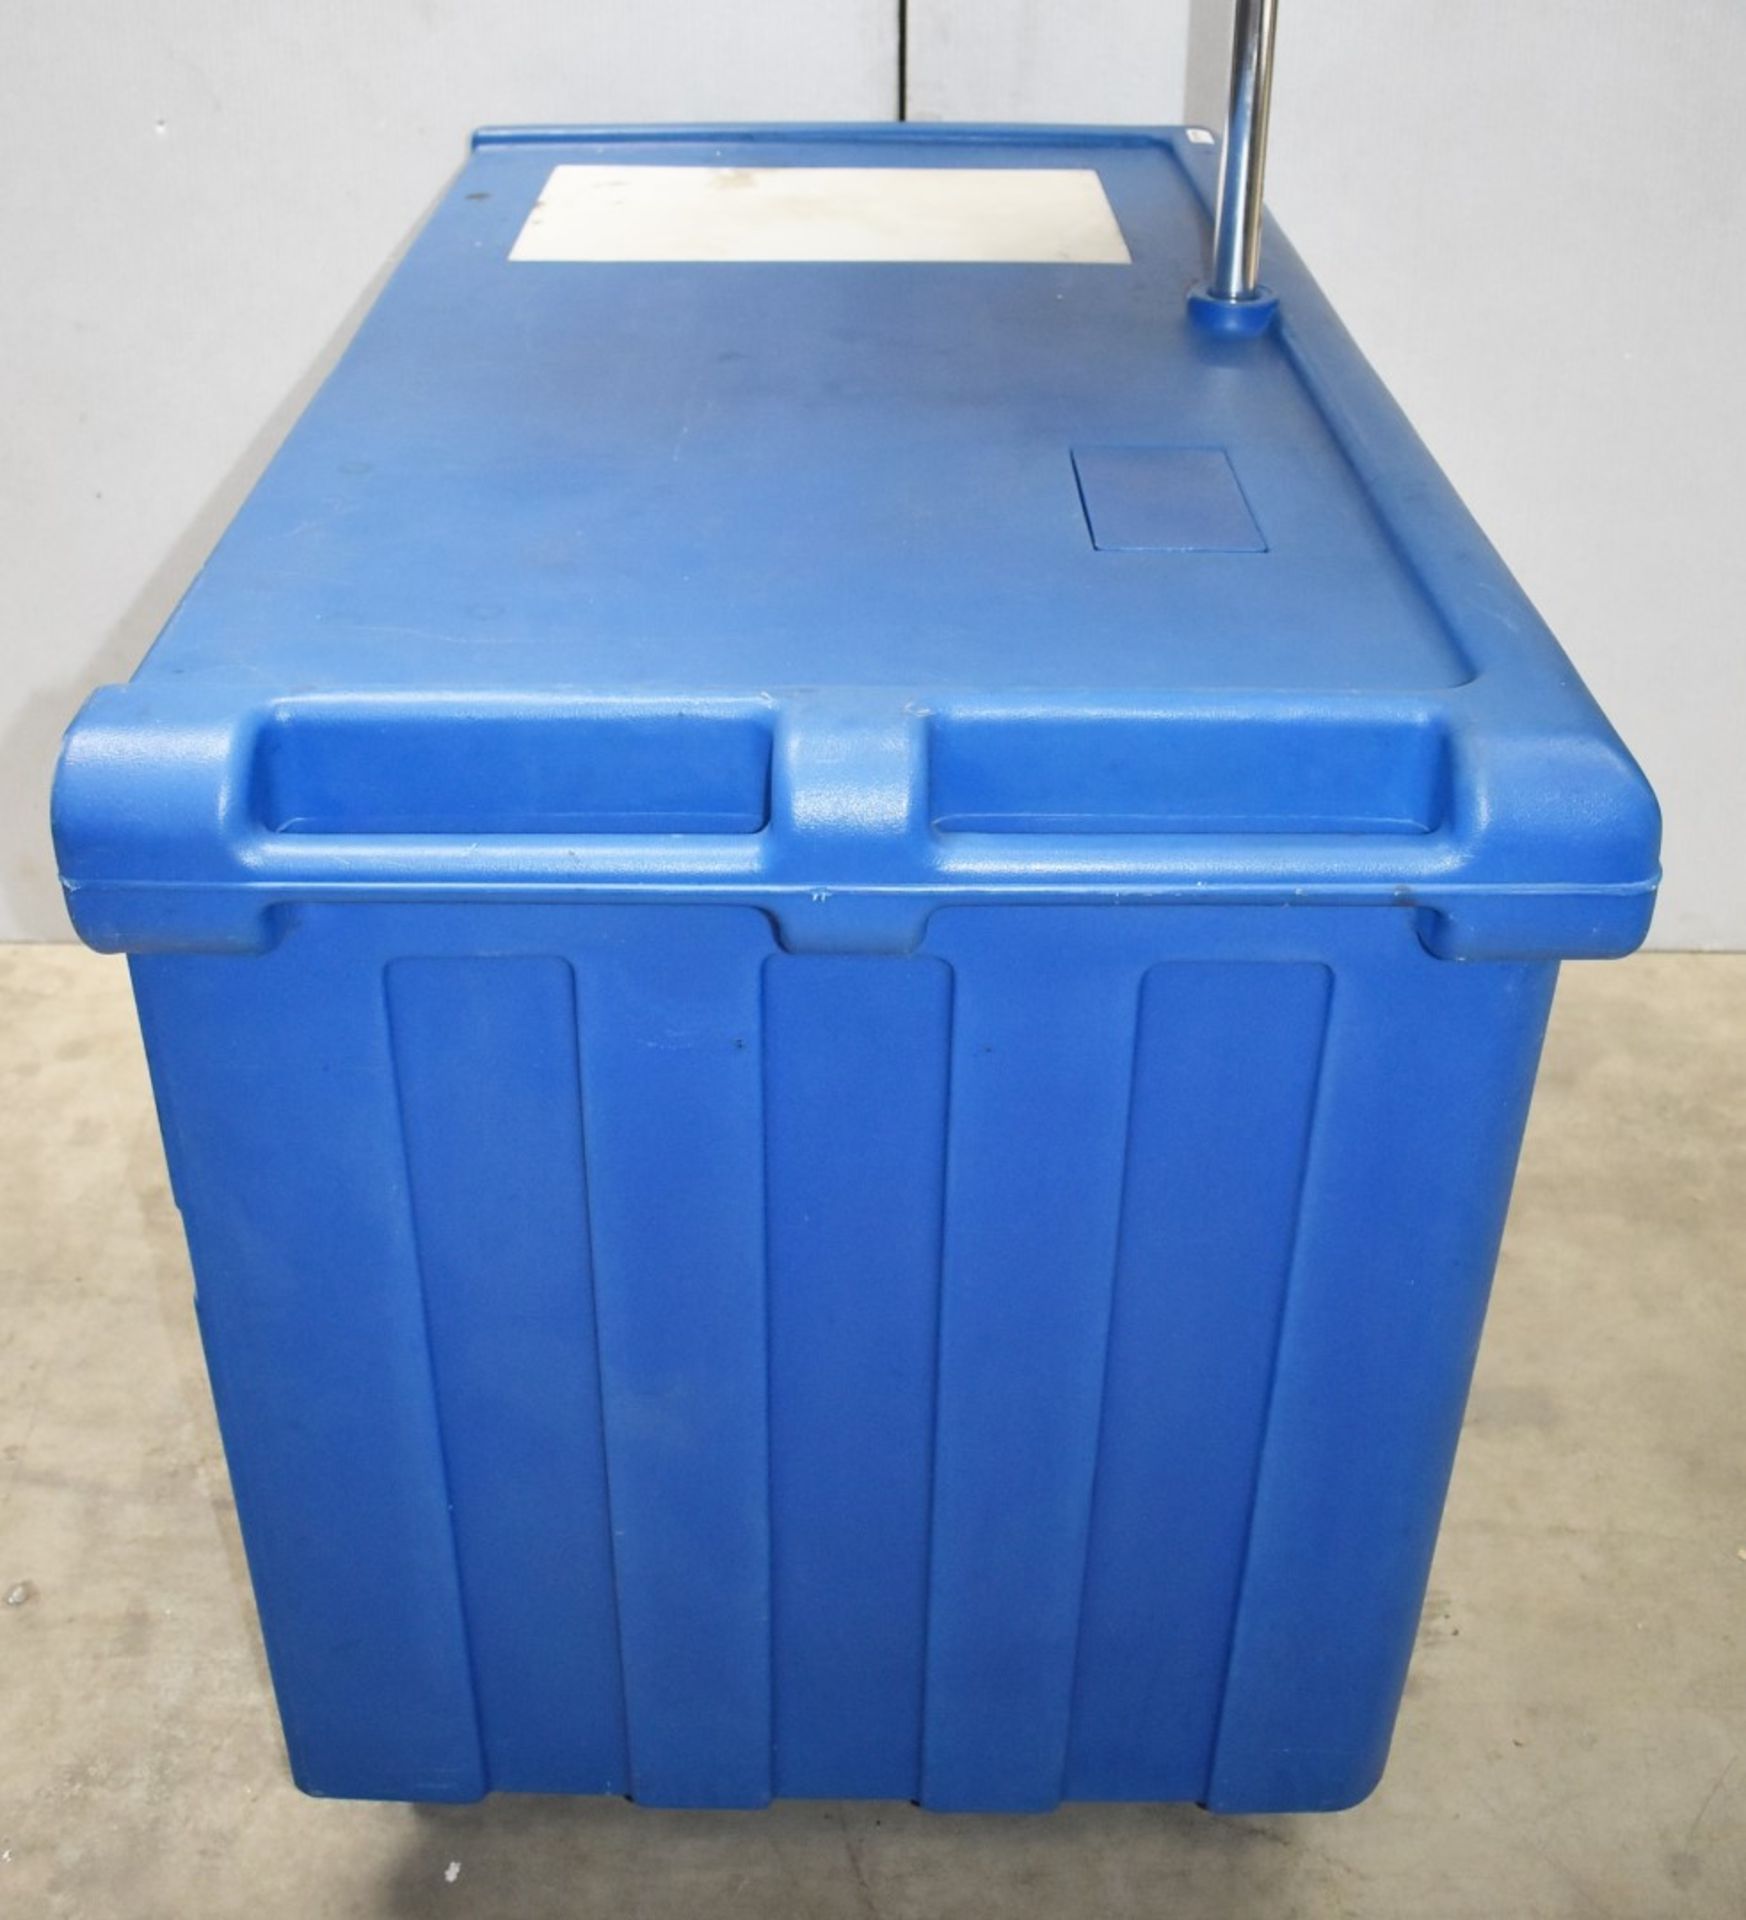 1 x Cambro Mobile BBQ Food Station With Parasol - Lightweight Plastic Design With Storage - Image 7 of 14